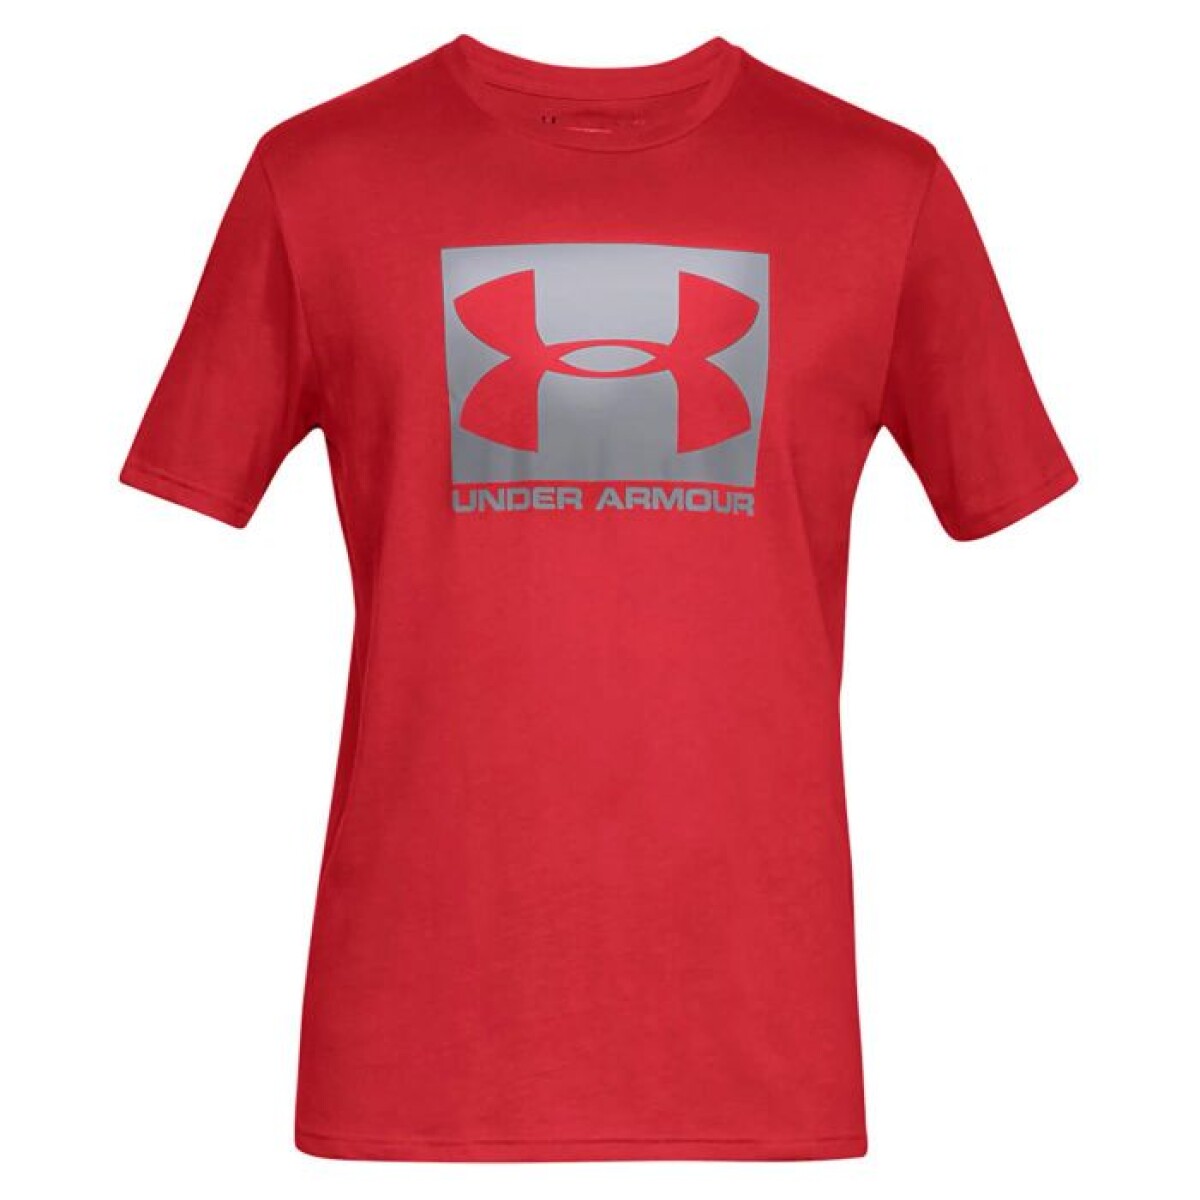 Remera Under Armour Hombre Boxed - S/C 